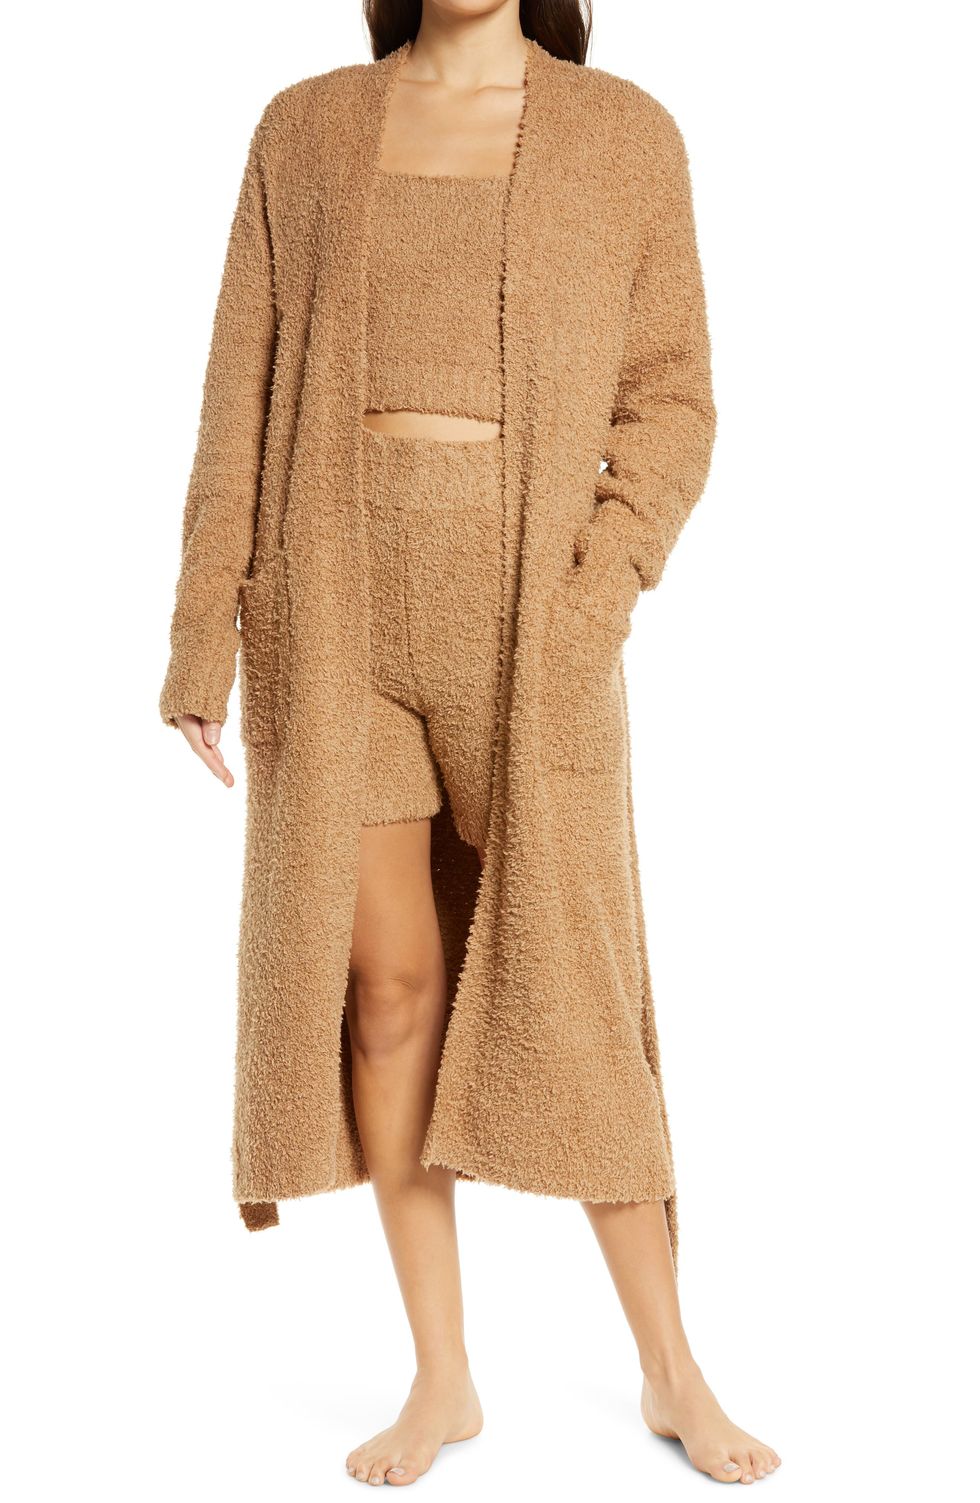 SKIMS Cozy Knit Bouclé Robe Is Totally Worth The Cost (And So Is